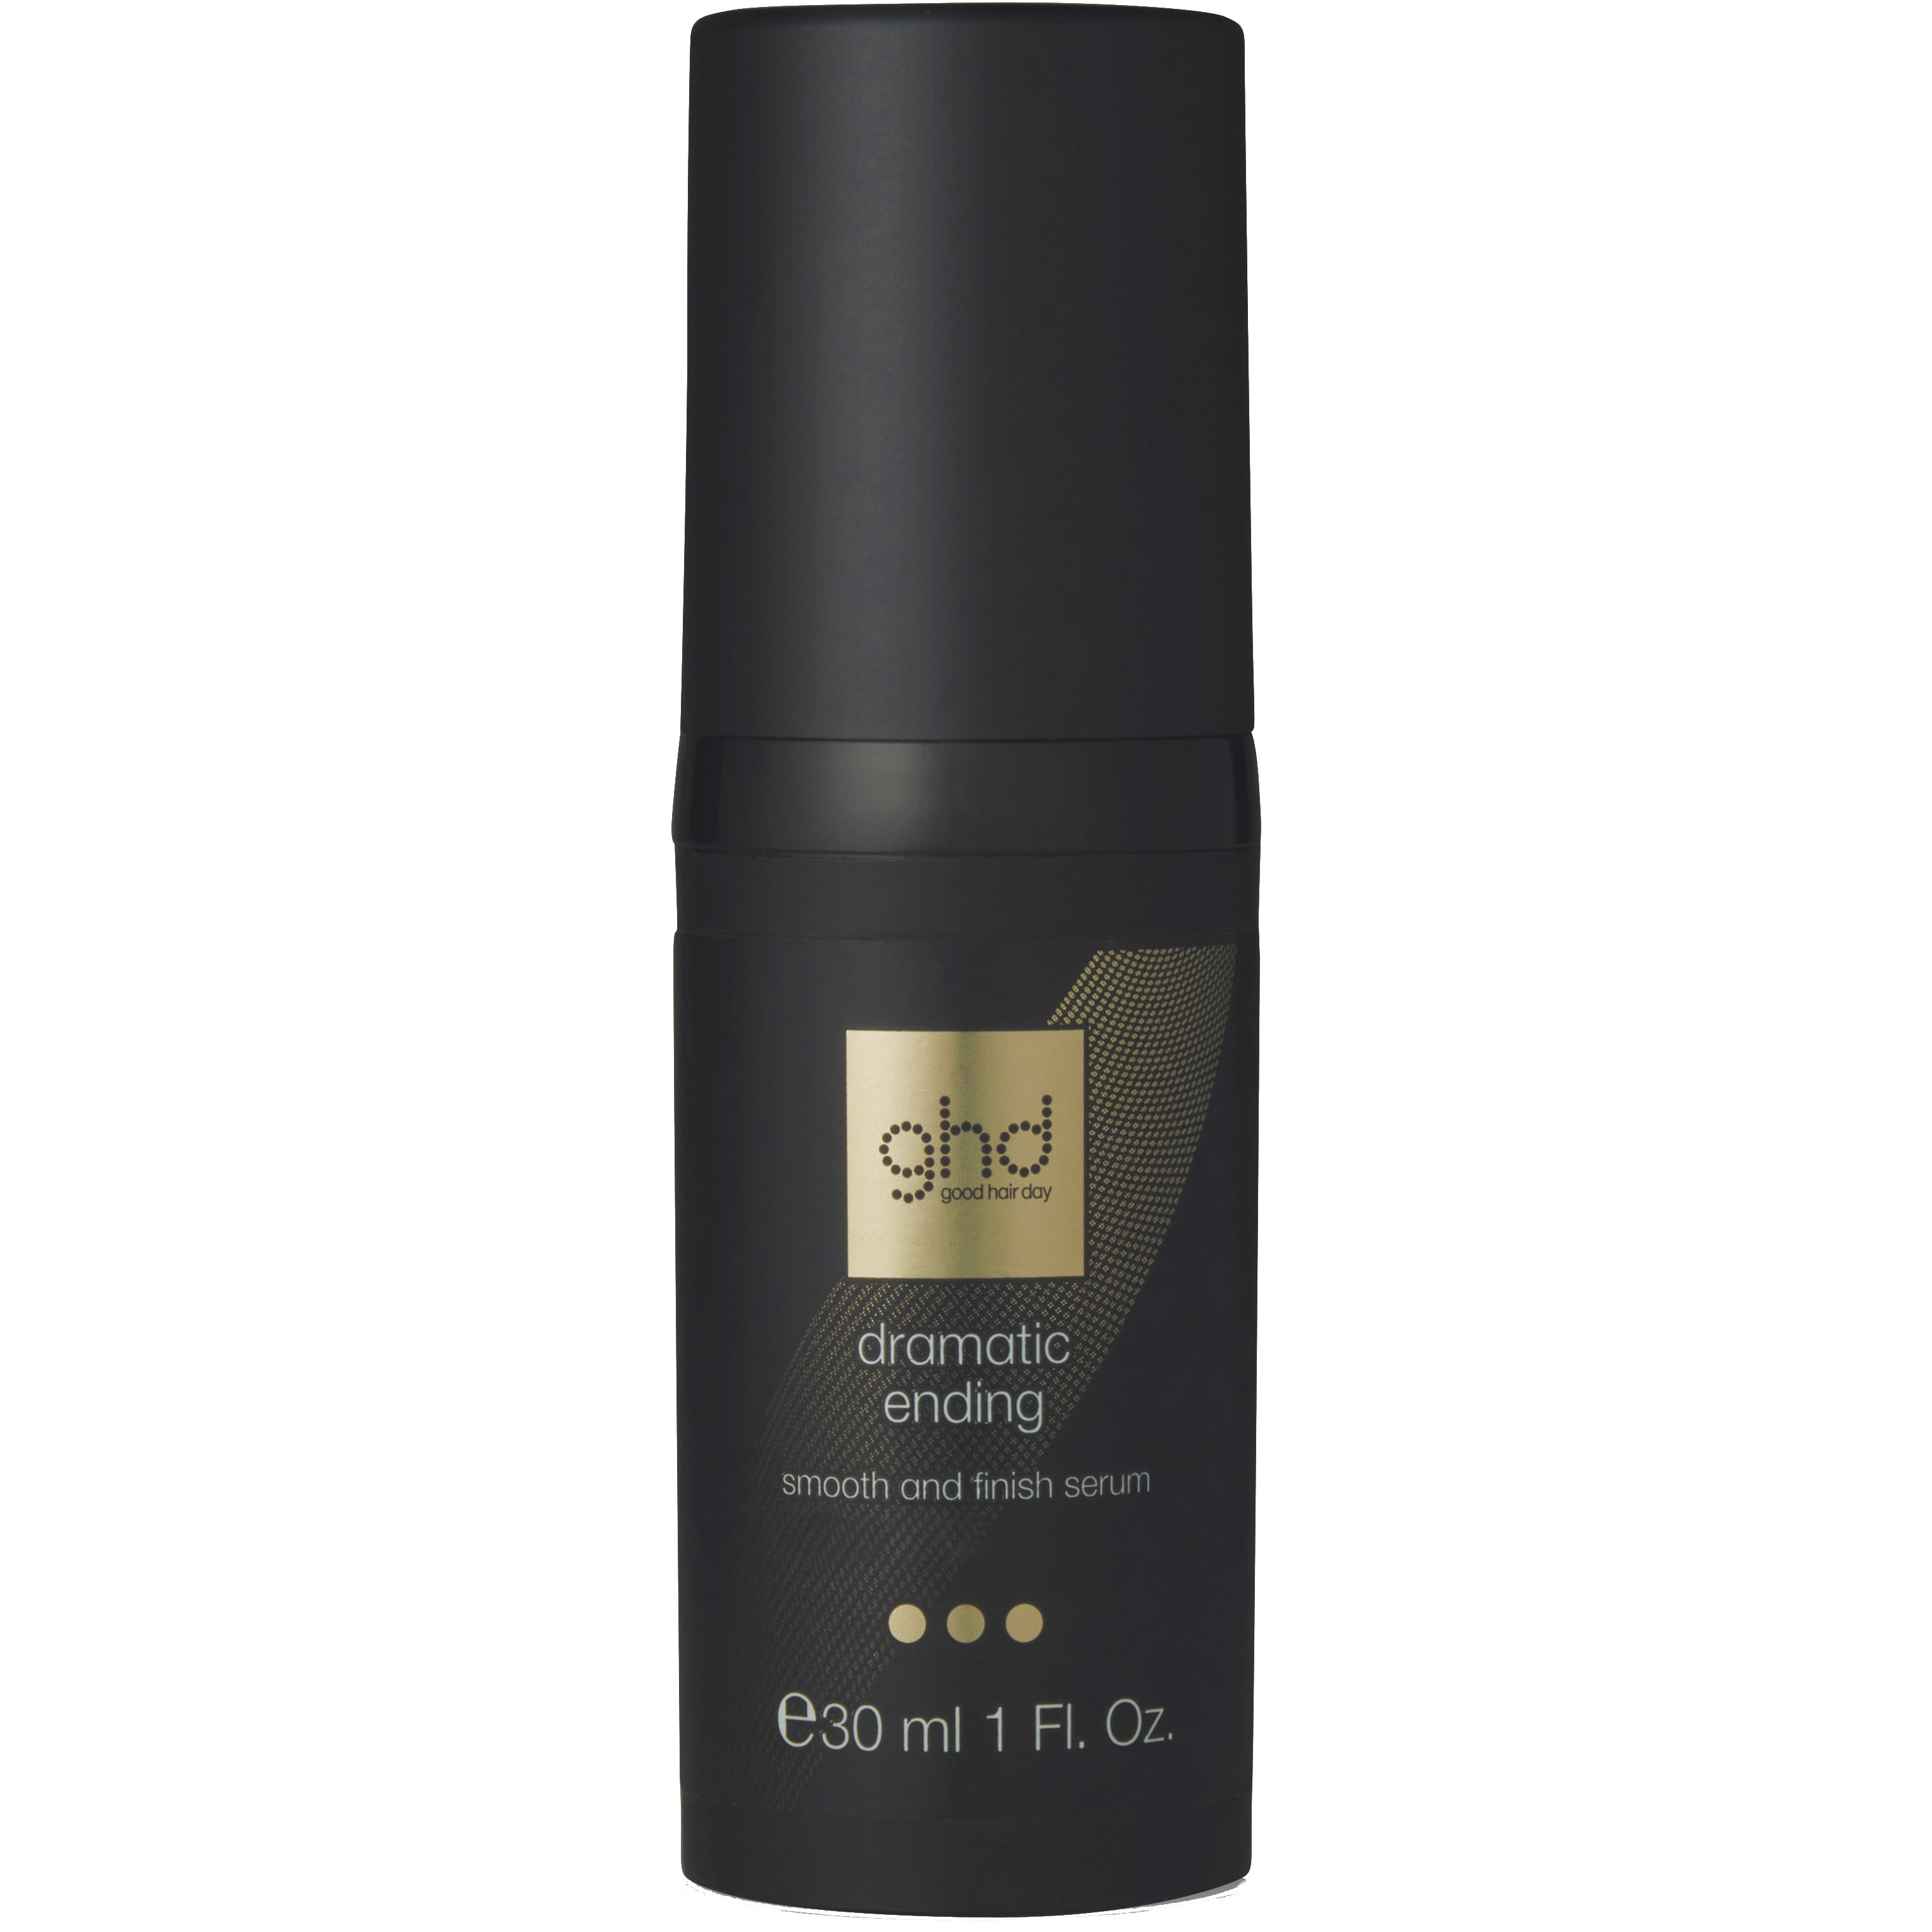 ghd Wetline Dramatic Ending – Smooth and Finish Serum  30 ml